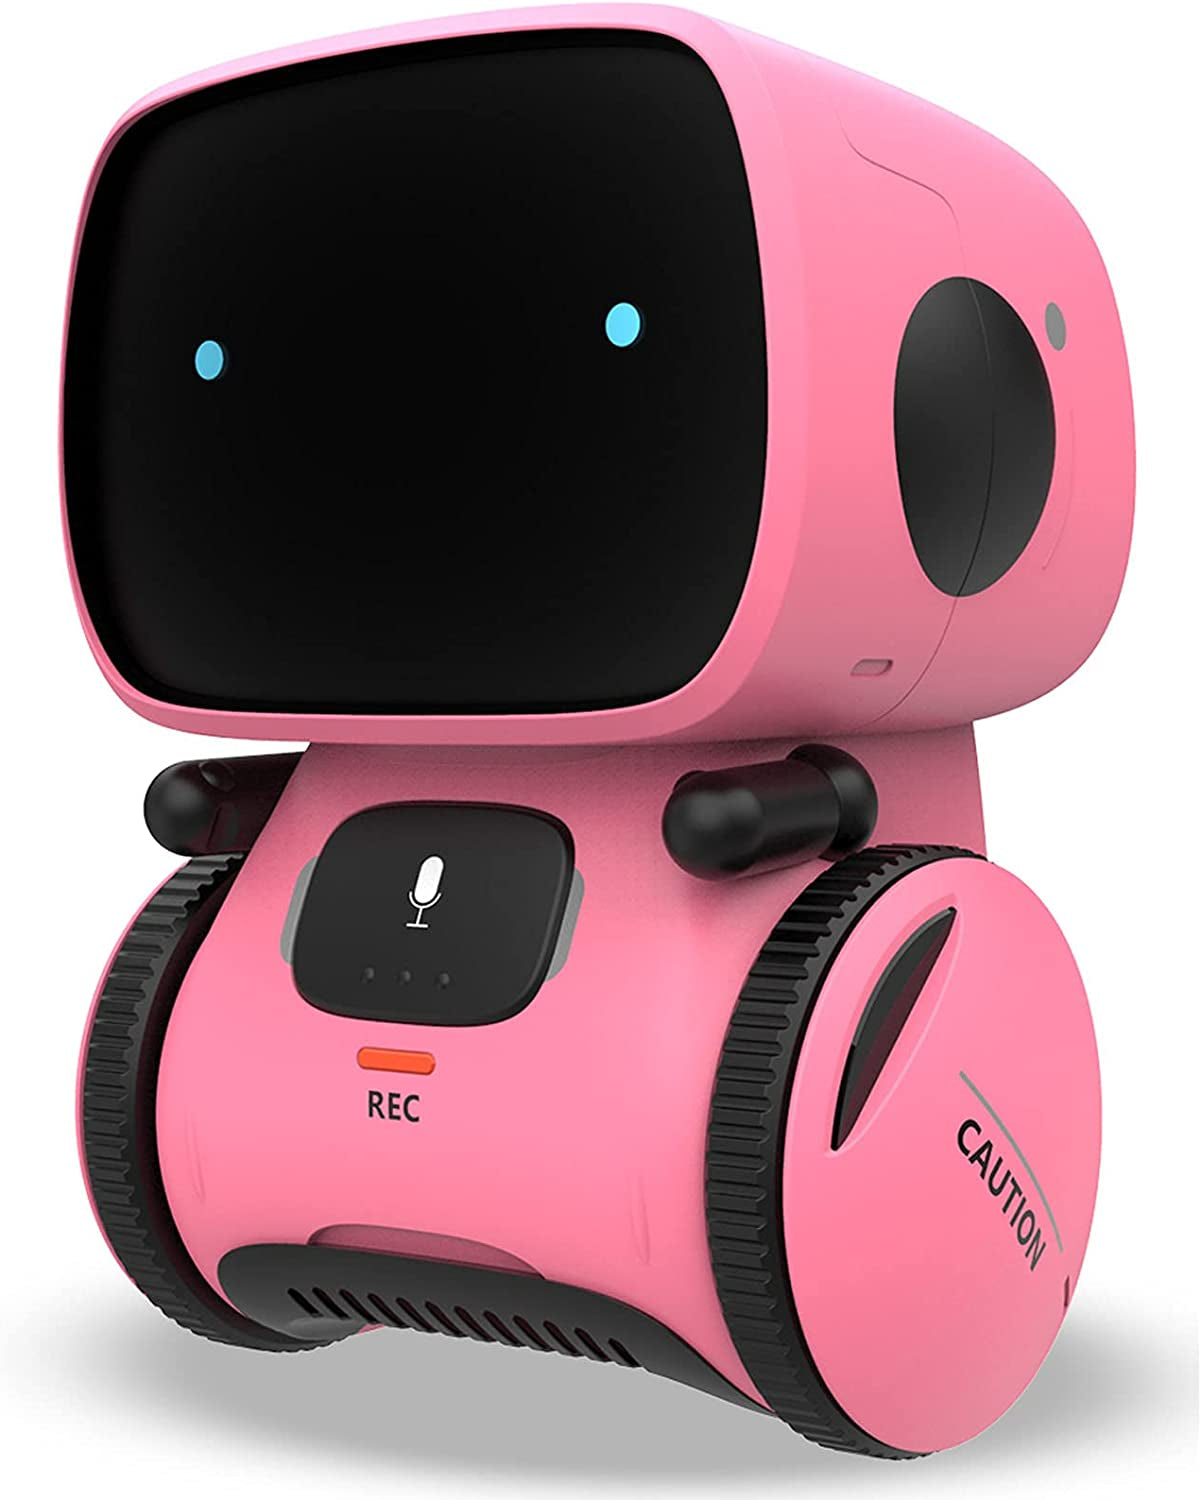 Robots for Girls 3-5, Interactive Smart Robotic with Touch Sensor, Voice Control, Speech Recognition, Singing, Dancing, Repeating and Recording, Gift for Kids